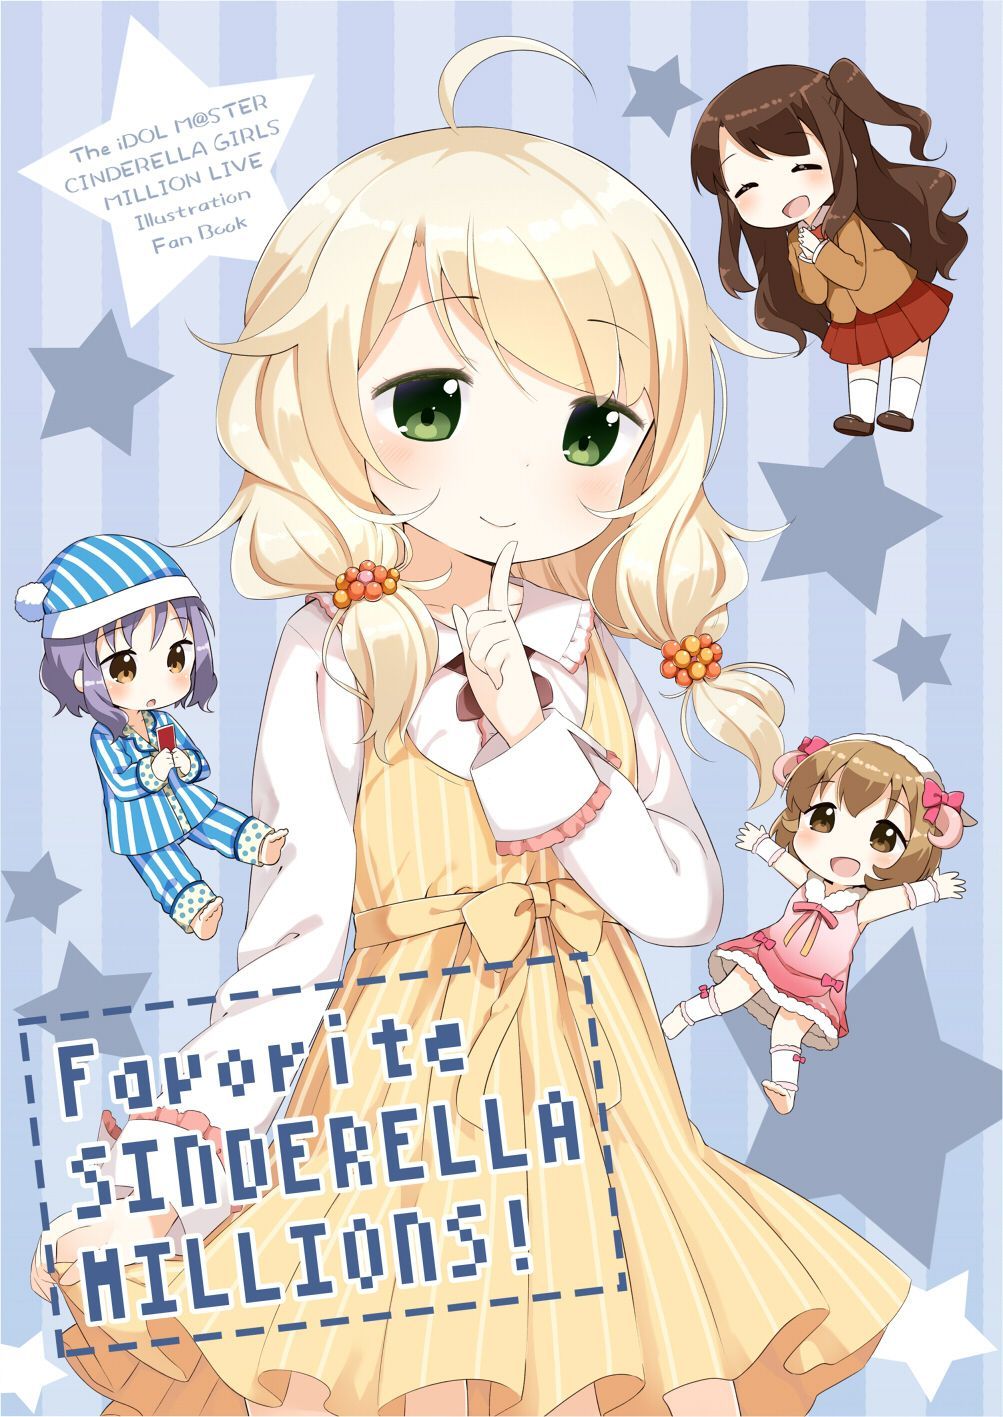 [Second / ZIP] soft sleepy idle yusa the rie's of cute images together "Cinderella girls (mobamas). 15